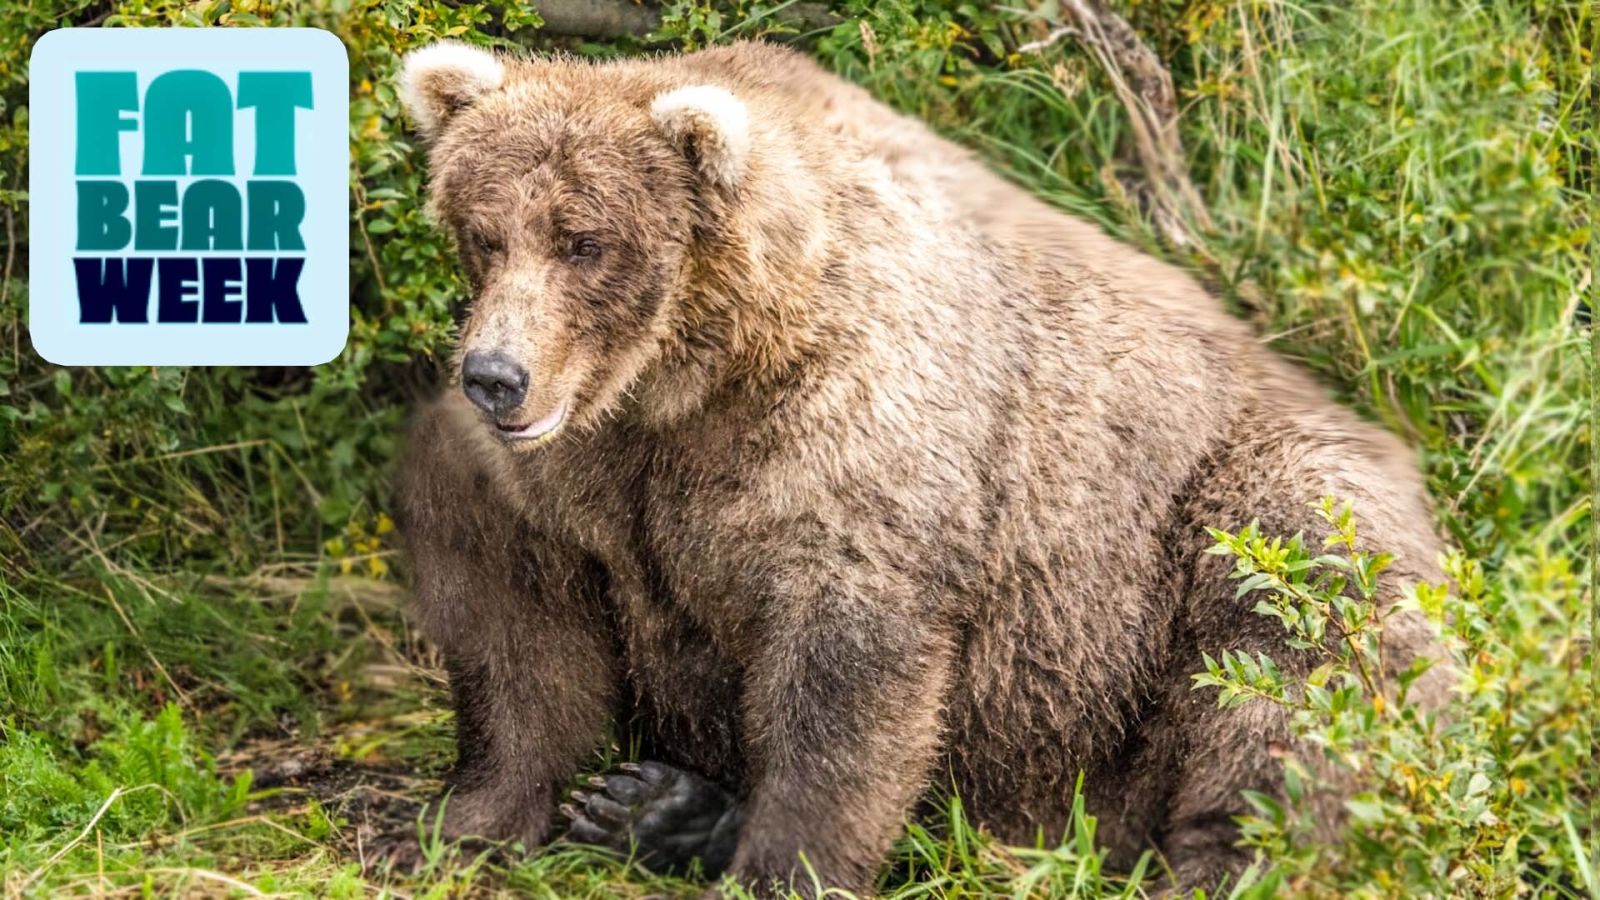 How Fat Bears Bulk Up To Hibernate (And Why We Love To See It)